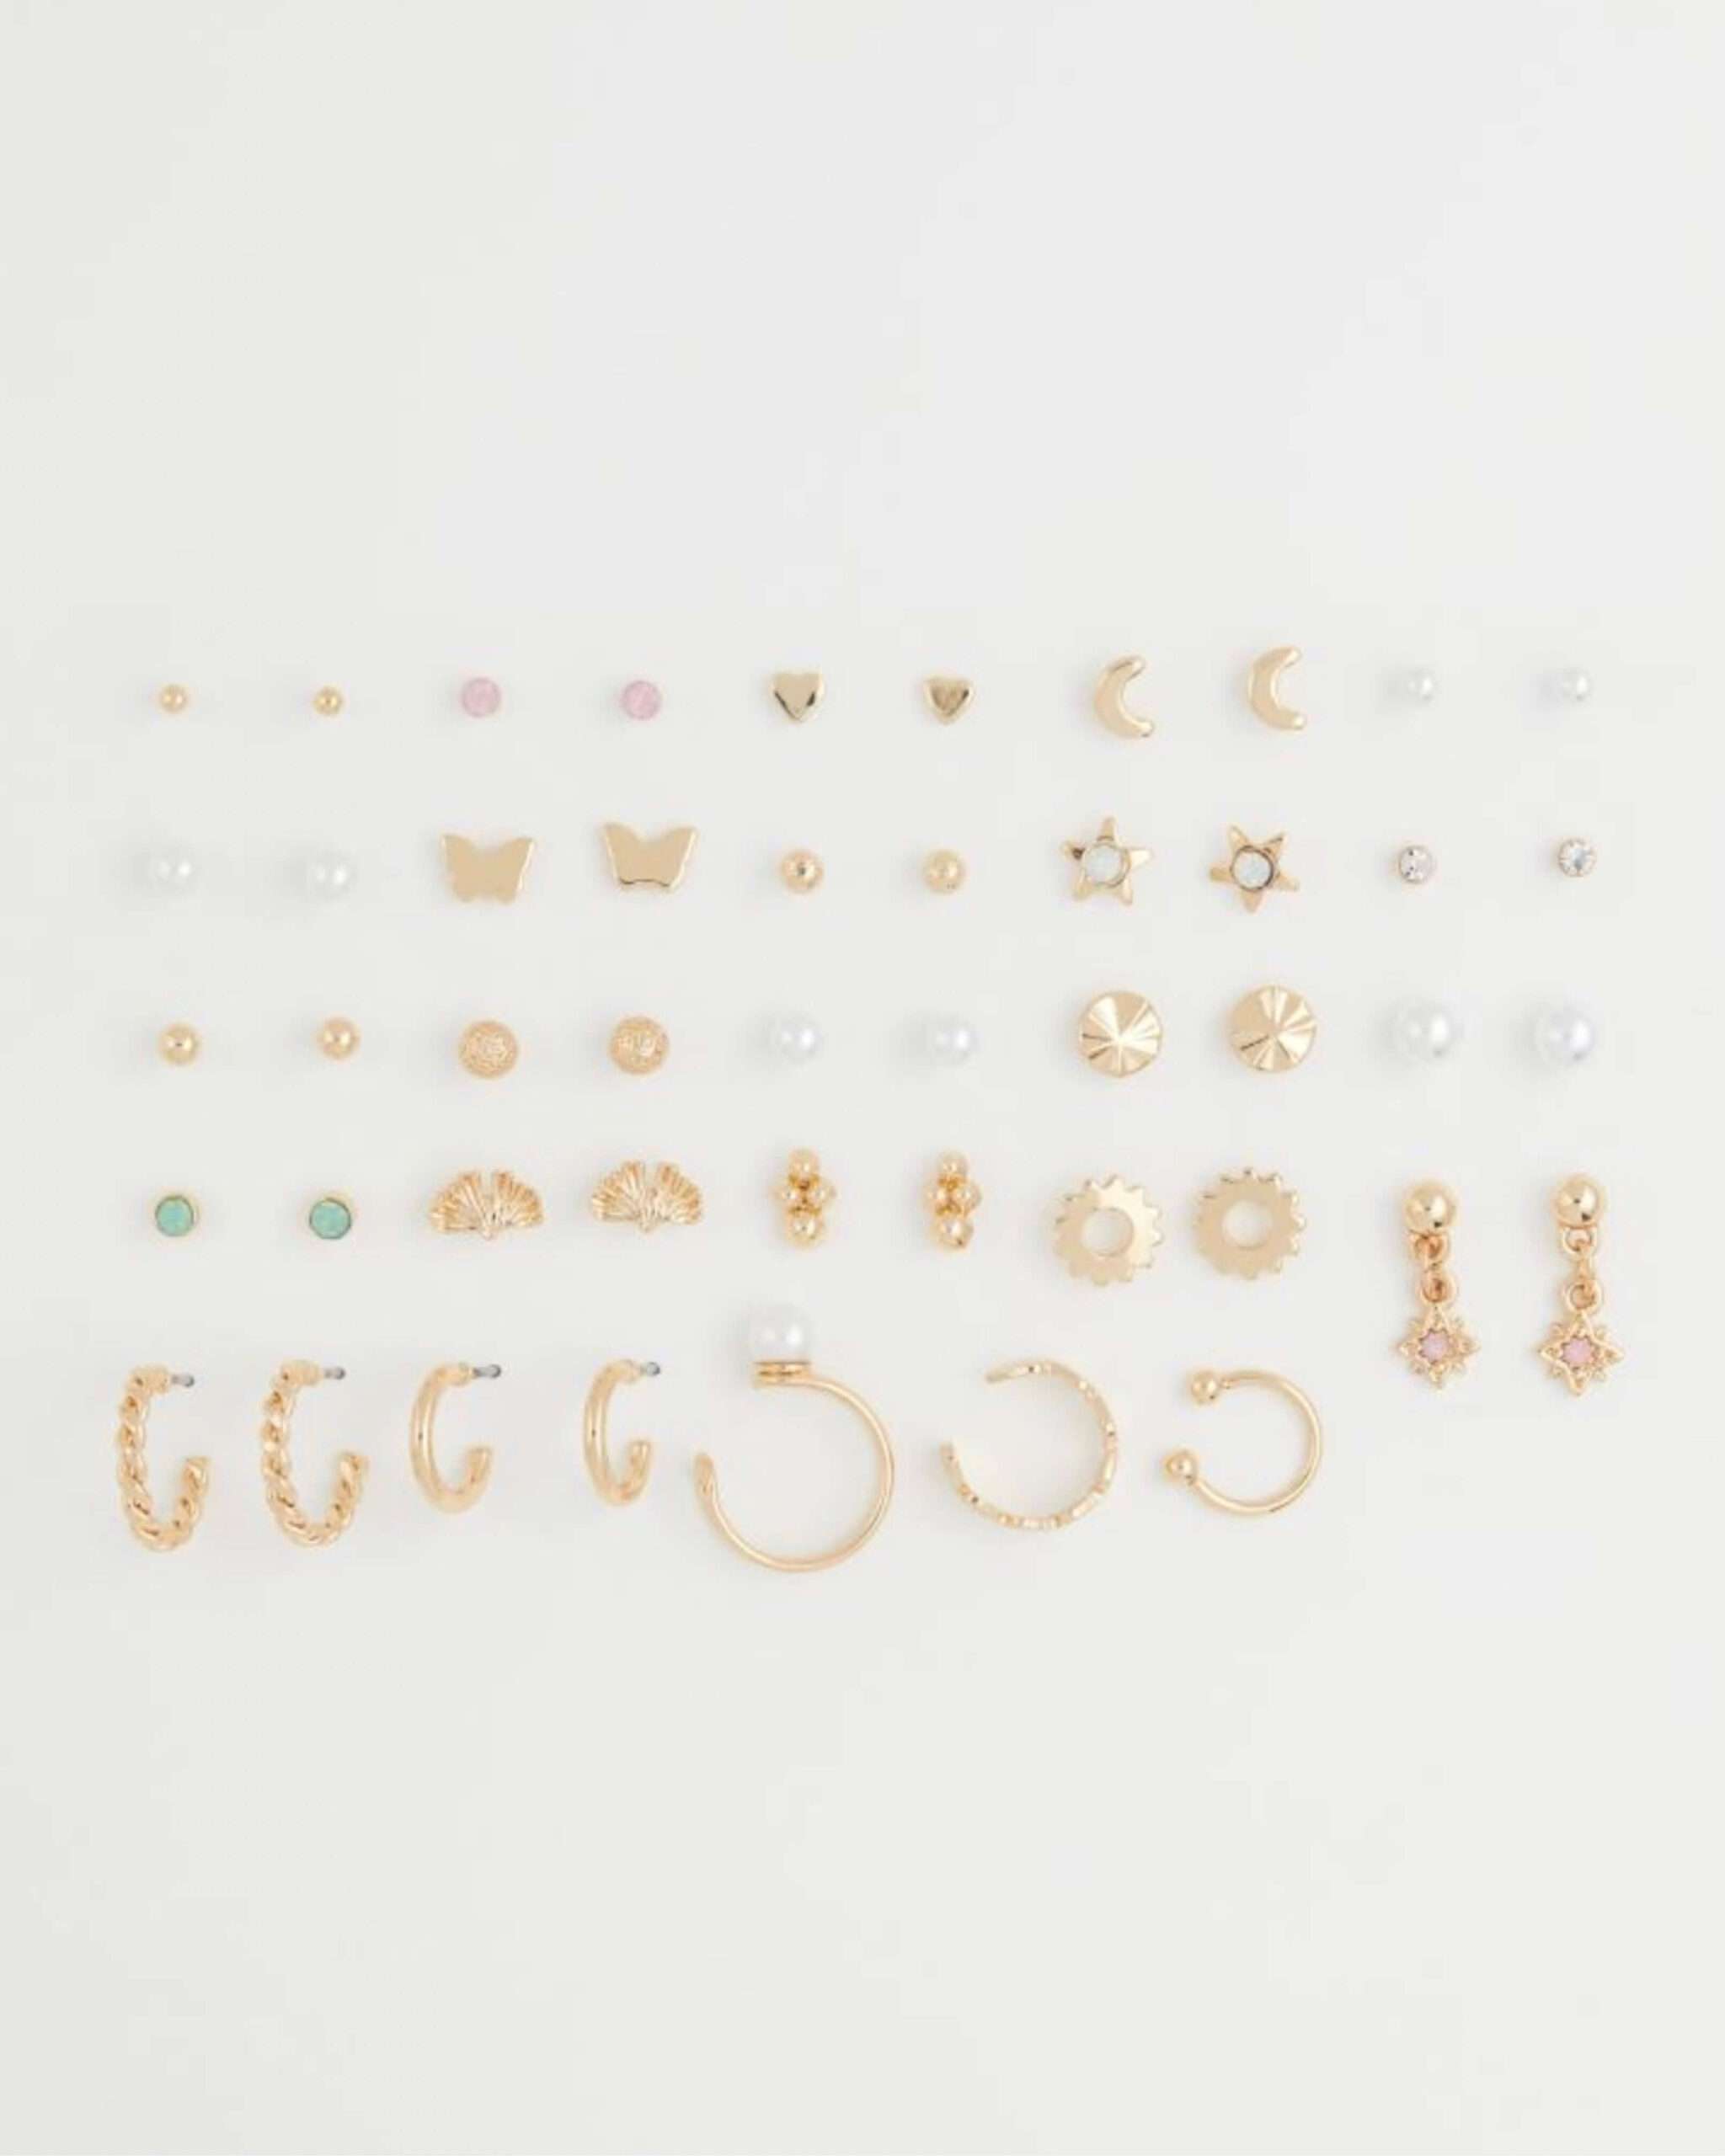 H&M All in one 25-pack earrings – Verncell